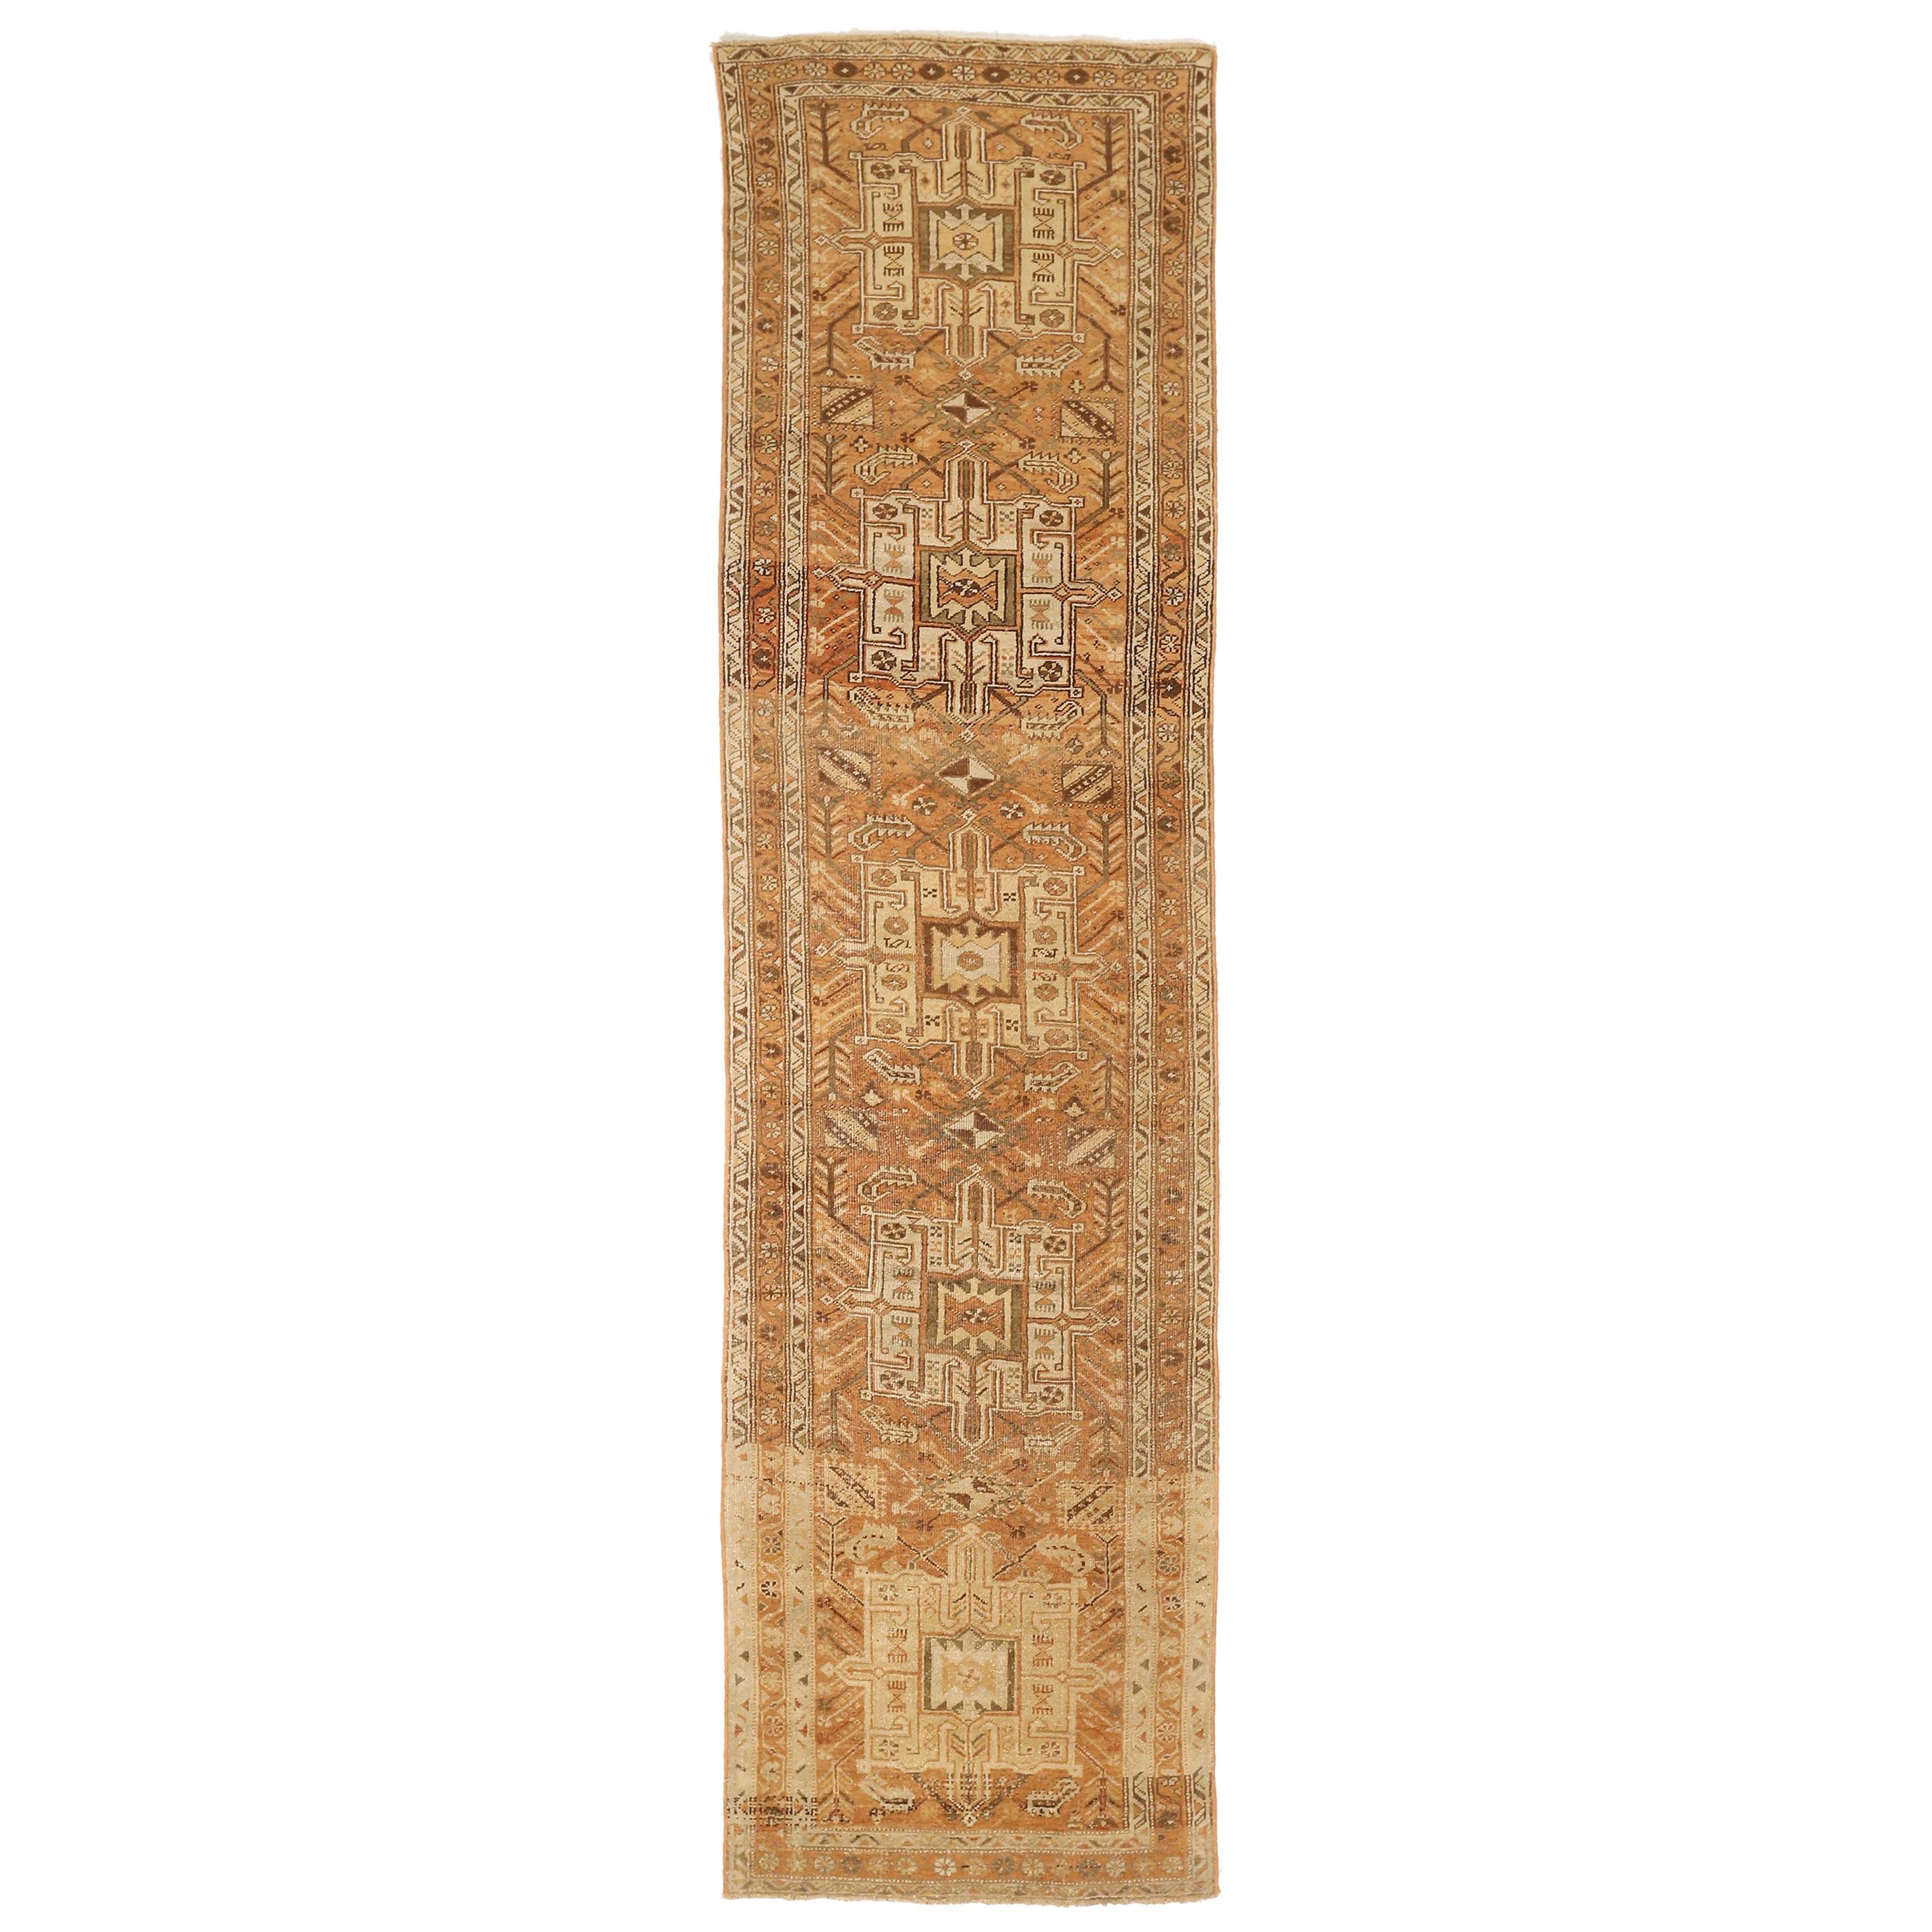 Antique Persian Heriz Runner Rug with Ivory and Brown Tribal Details